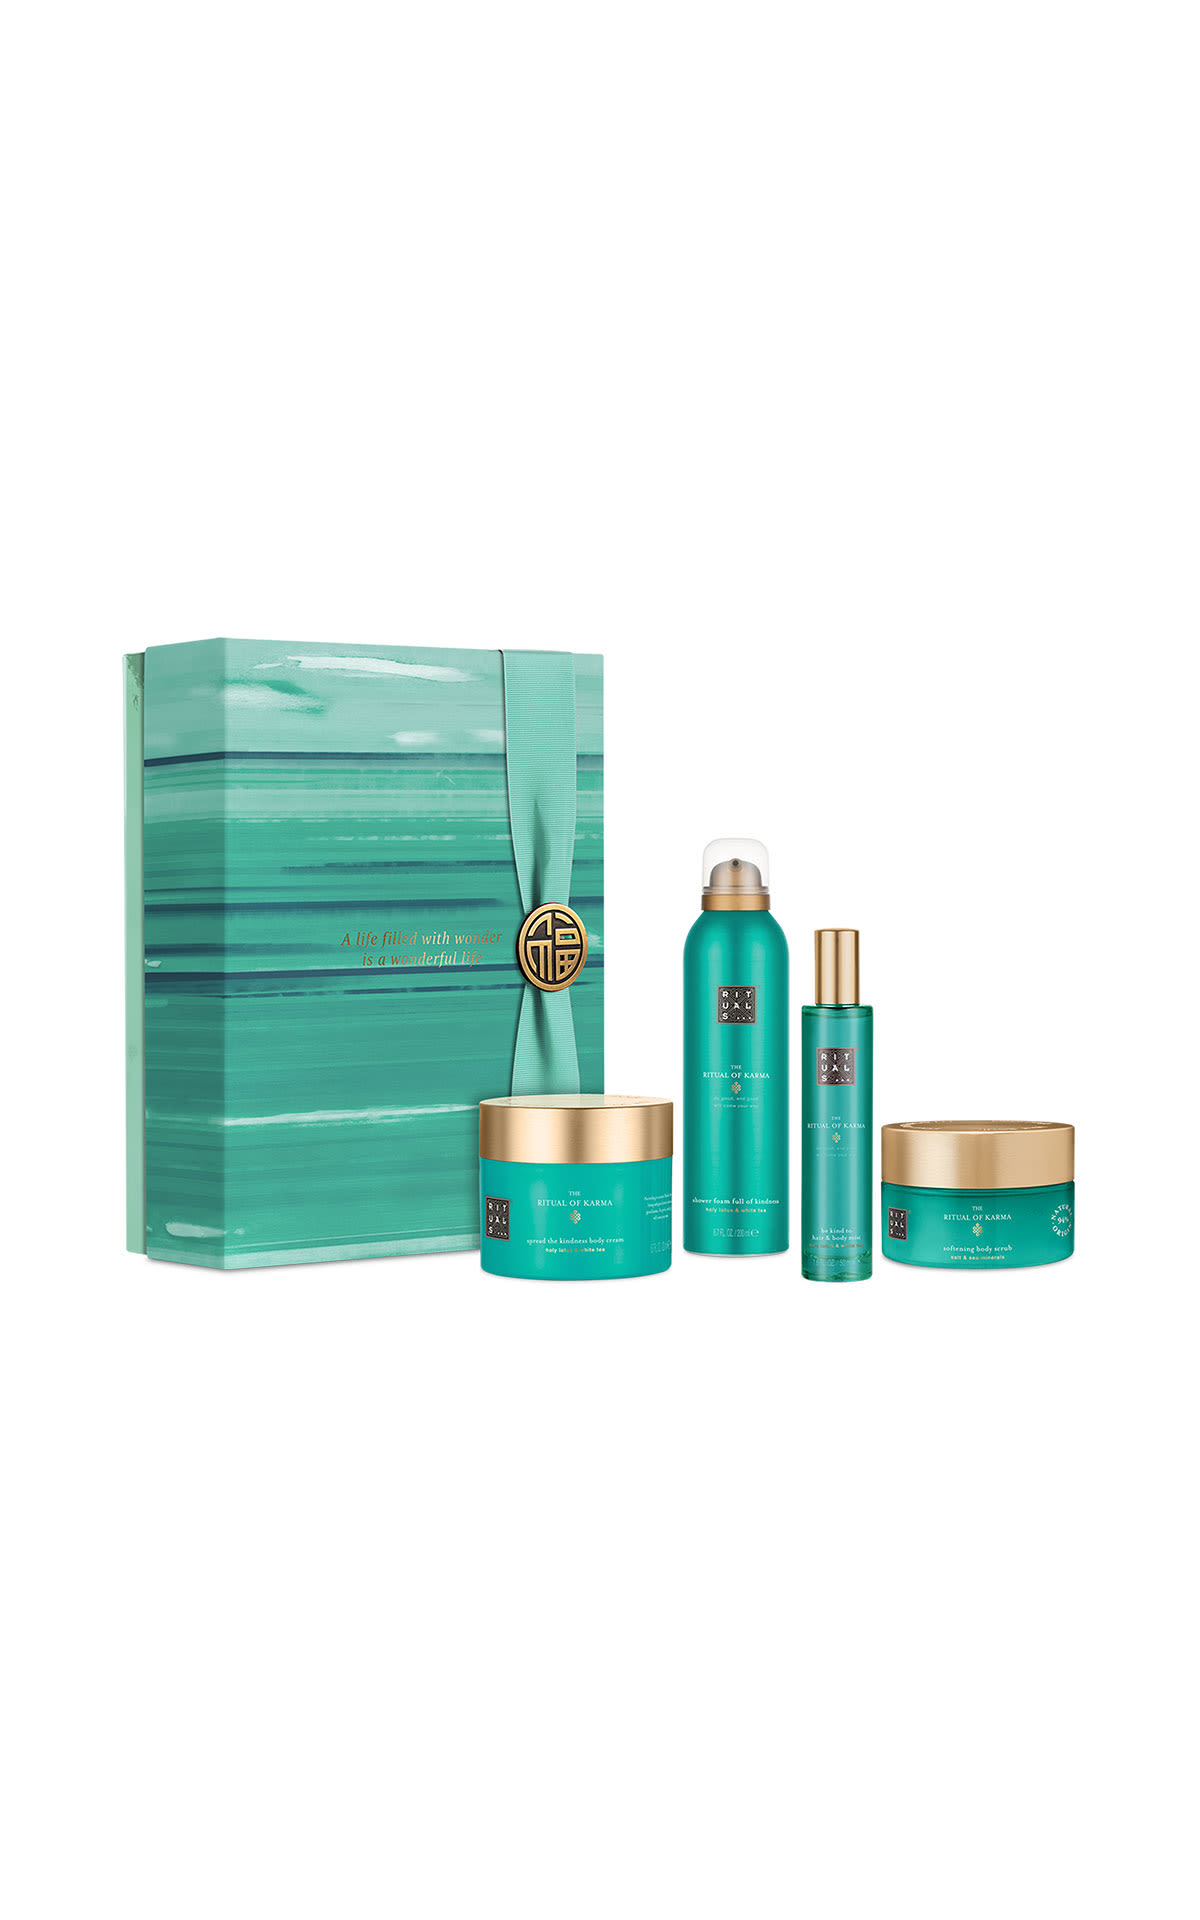 Rituals The Ritual of karma large gift set from Bicester Village